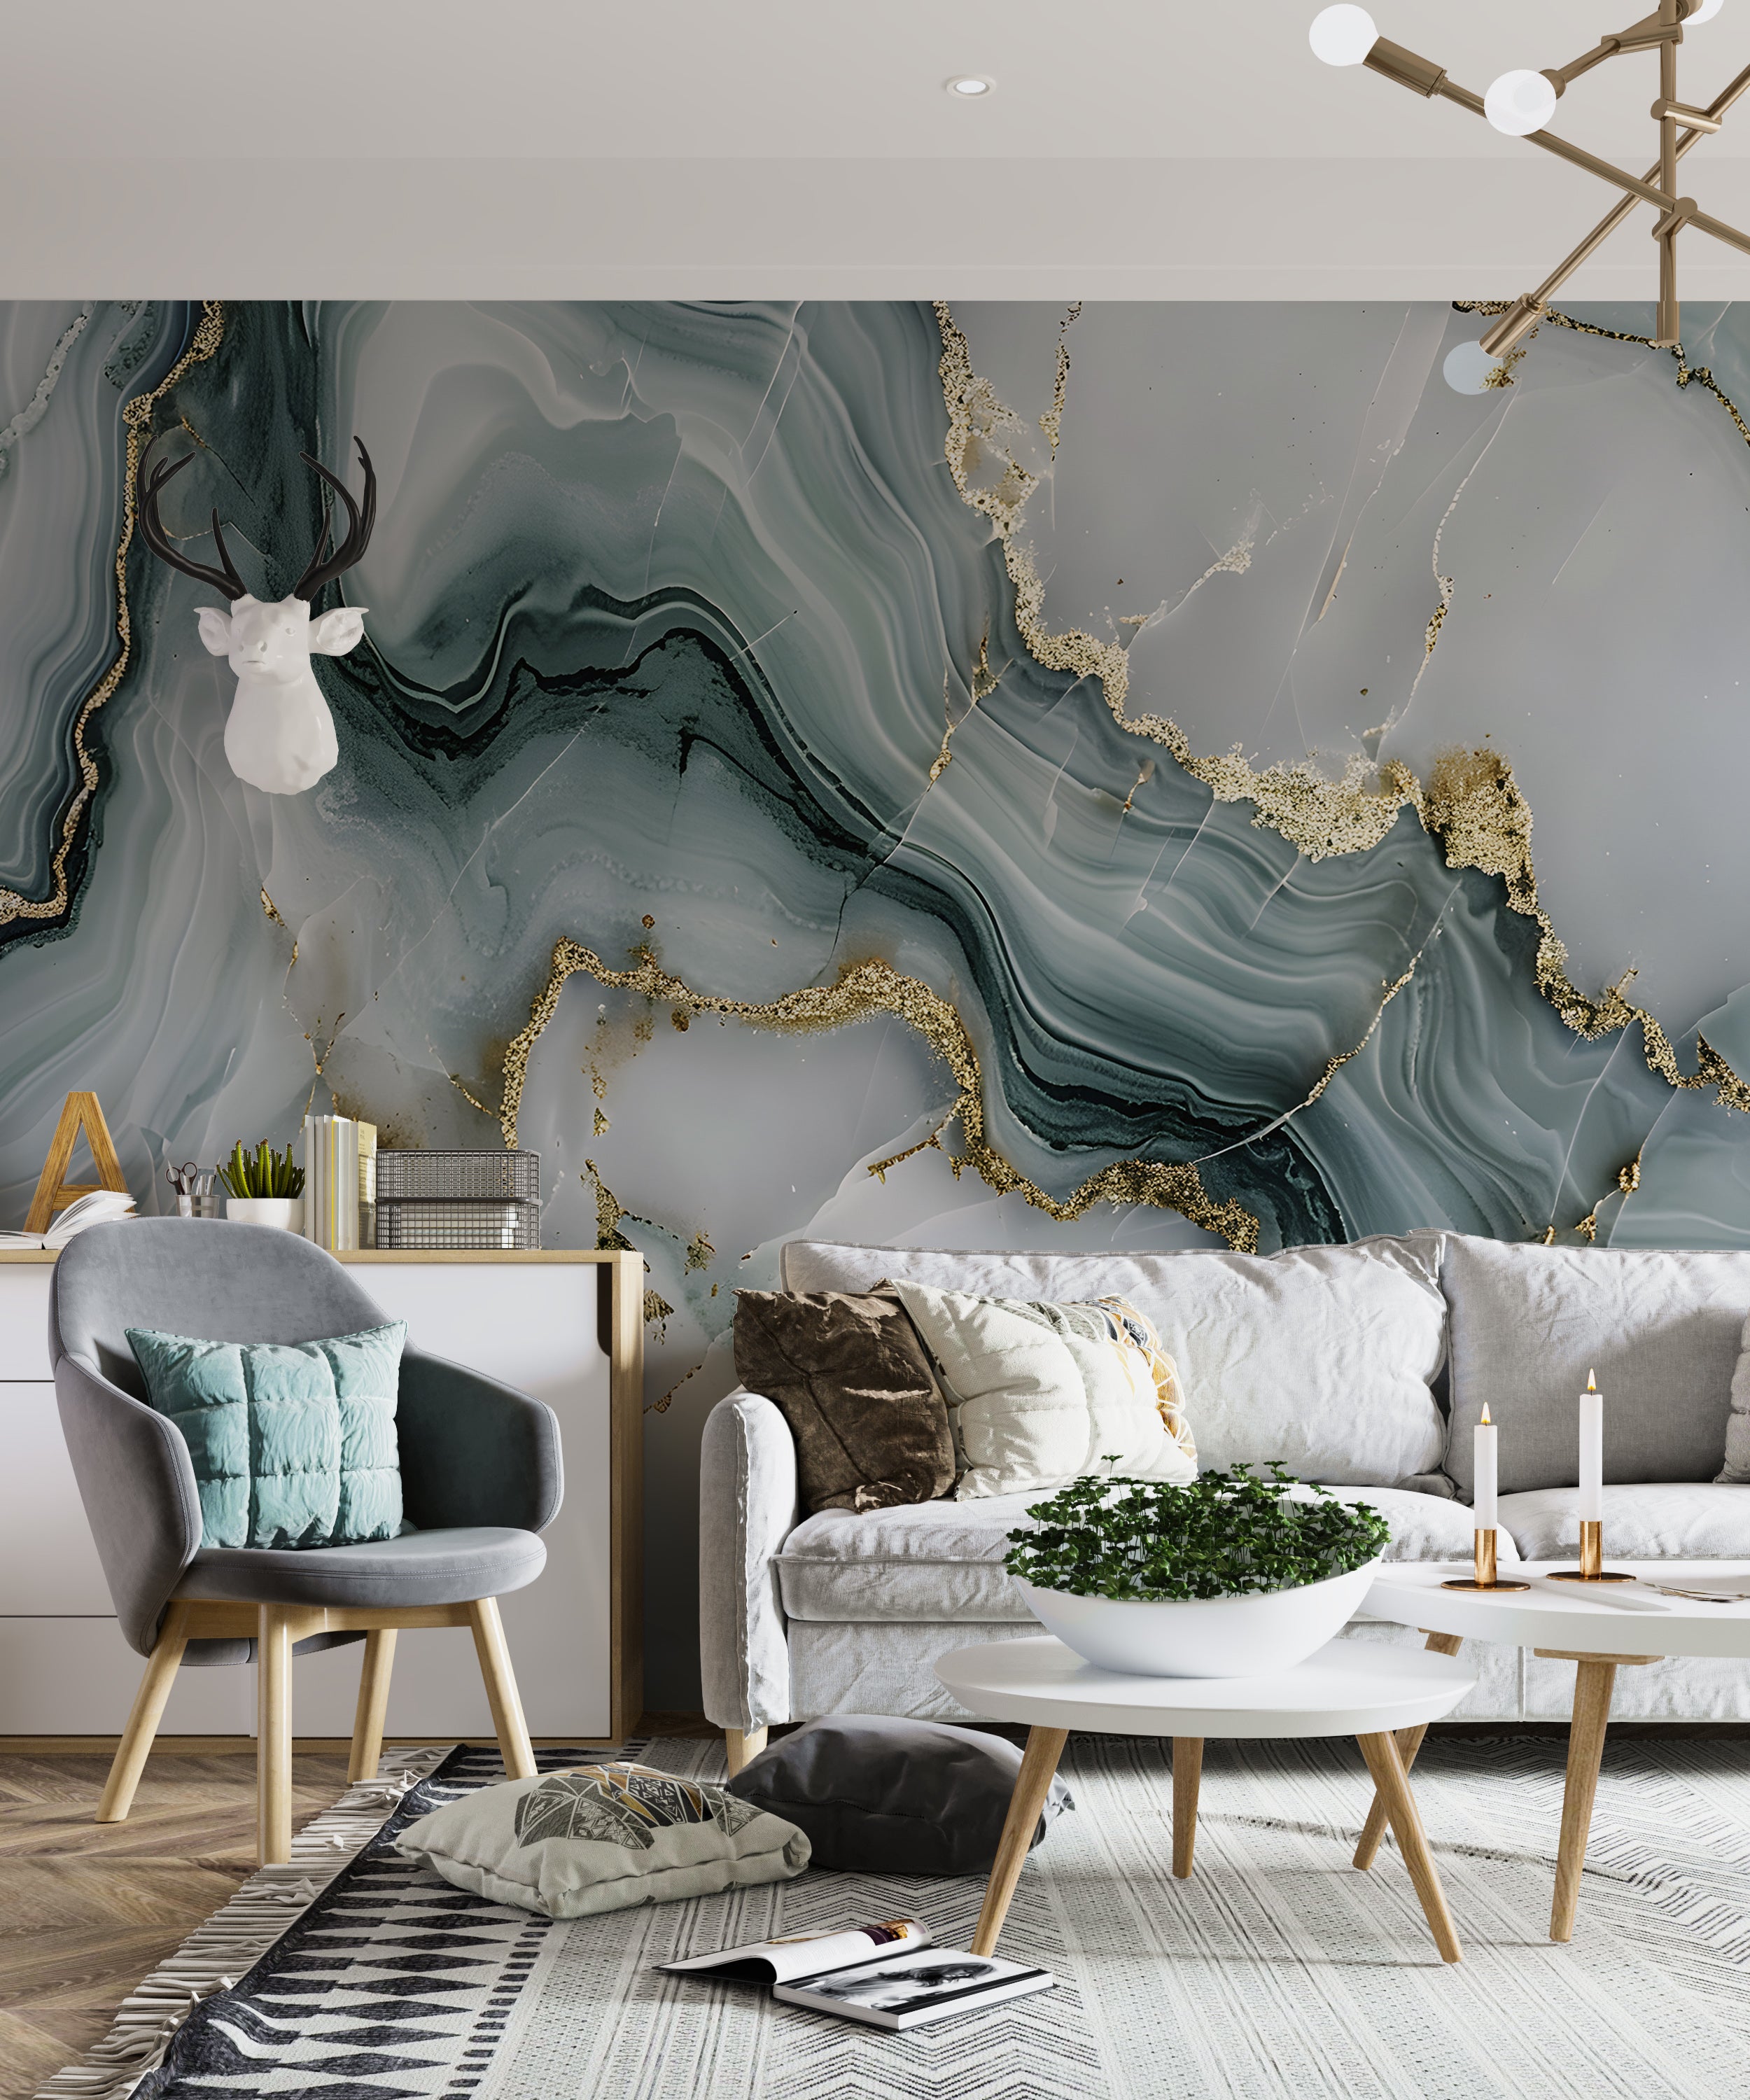 Mint Grey and Gold Alcohol Ink Mural, Peel and Stick Marble Texture Wallpaper, Abstract Green and Grey Stone Wall Decor, Removable Unique Art